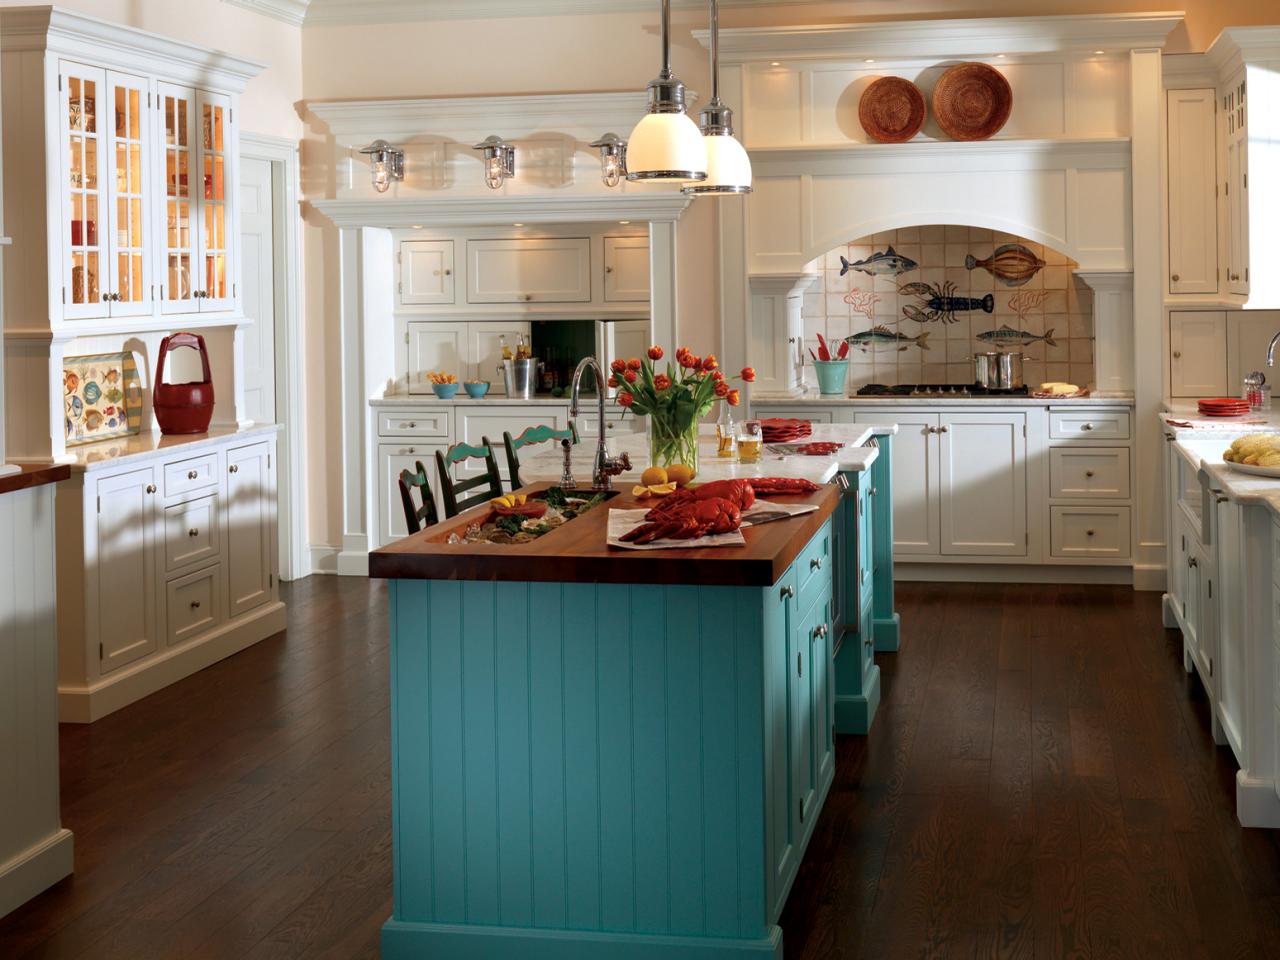 25 Tips For Painting Kitchen Cabinets DIY Network Blog Made